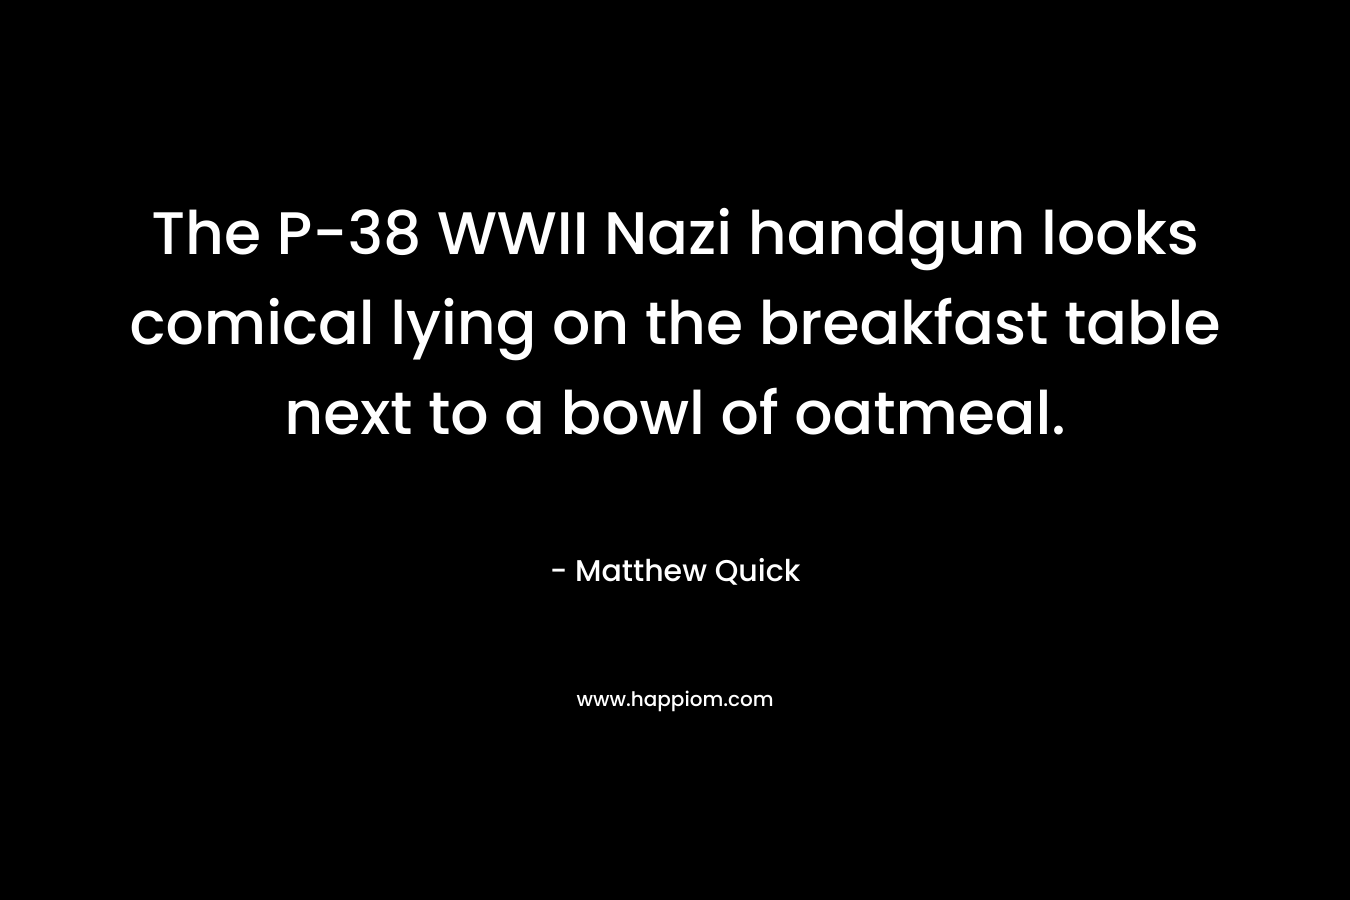 The P-38 WWII Nazi handgun looks comical lying on the breakfast table next to a bowl of oatmeal. – Matthew Quick